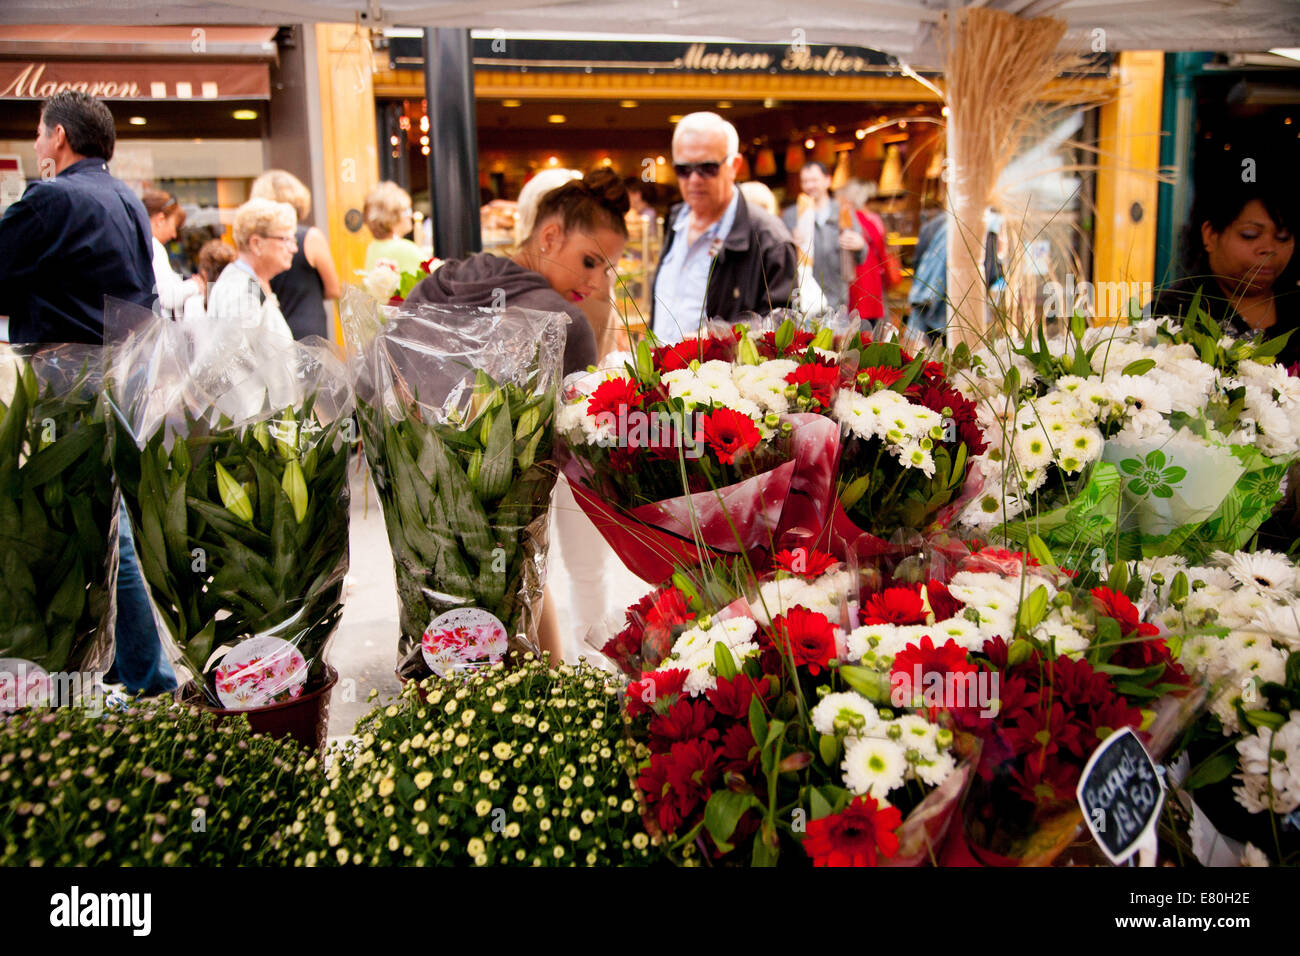 A flowers in Seafood market, Le Havre, Seine-Maritime department, Upper Normandy, France Stock Photo